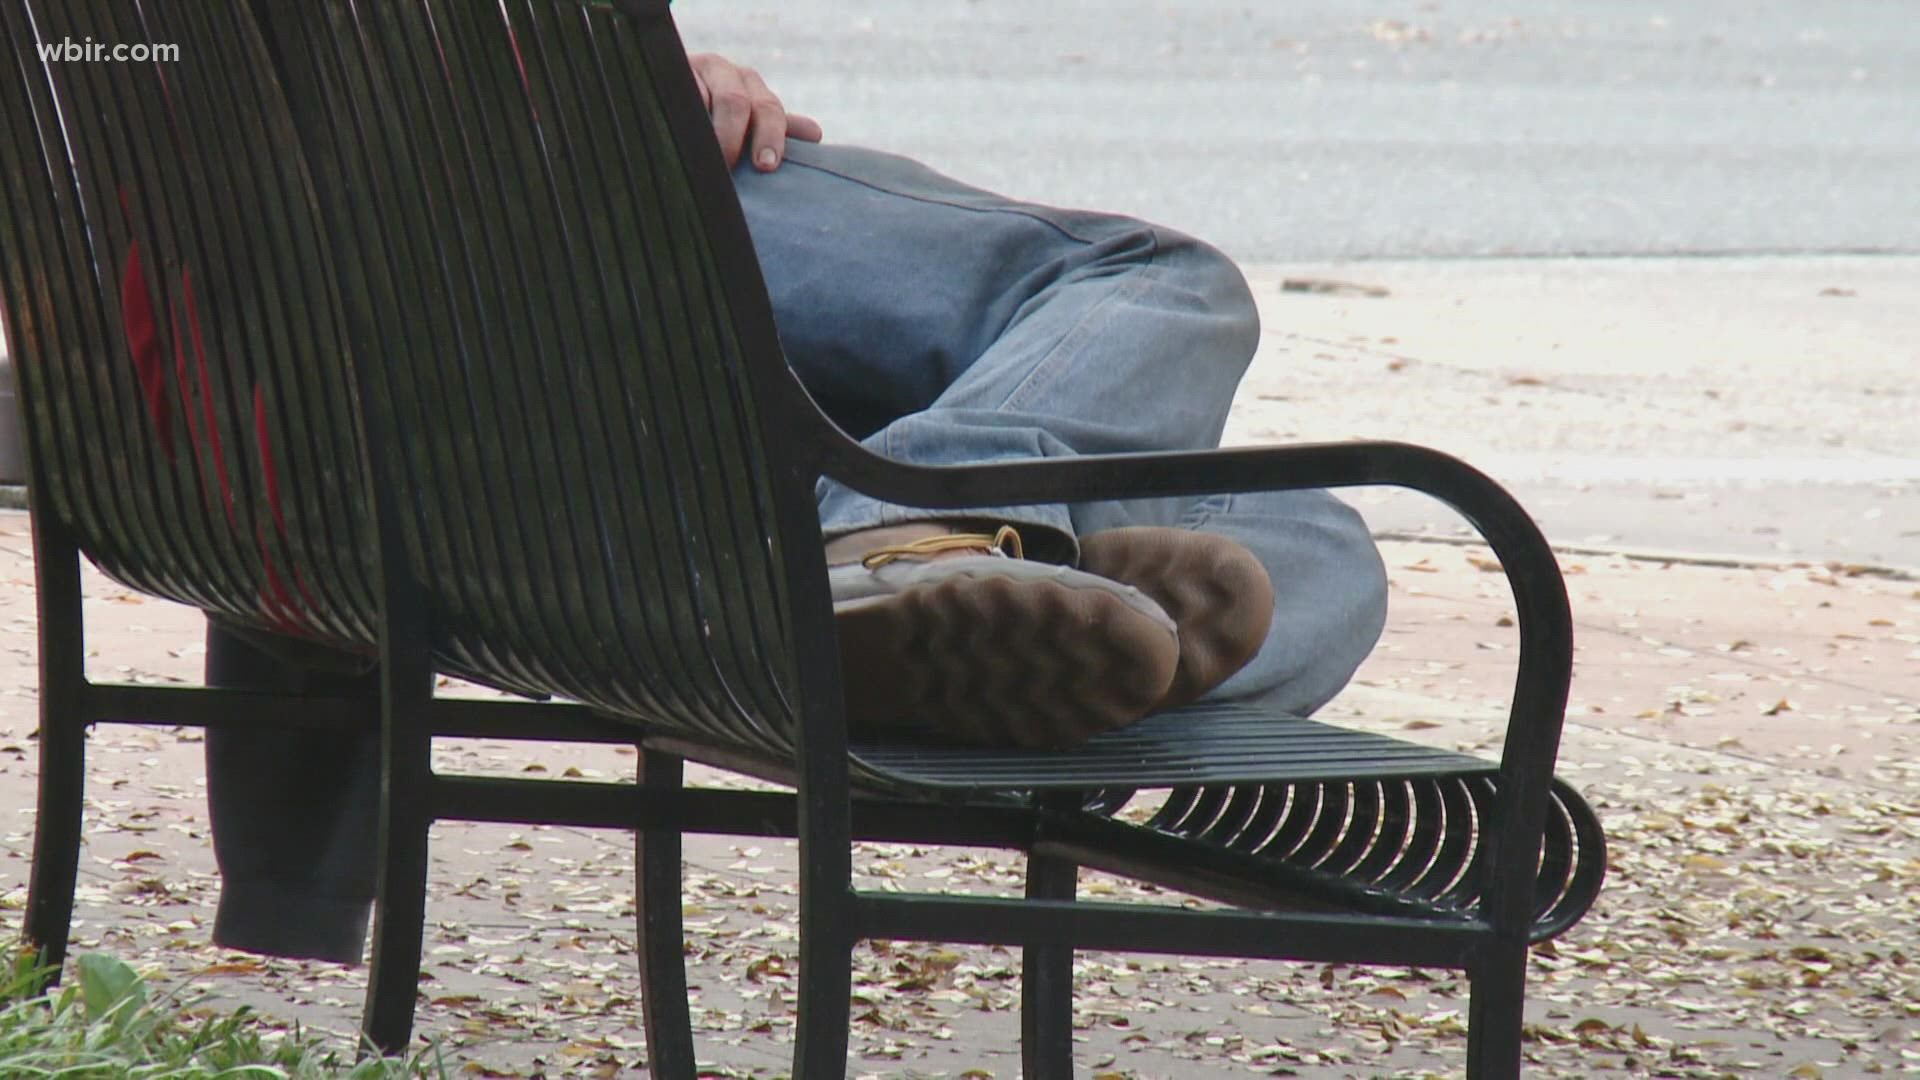 Data shows that there are around 1,500 people living on the streets in Knoxville.